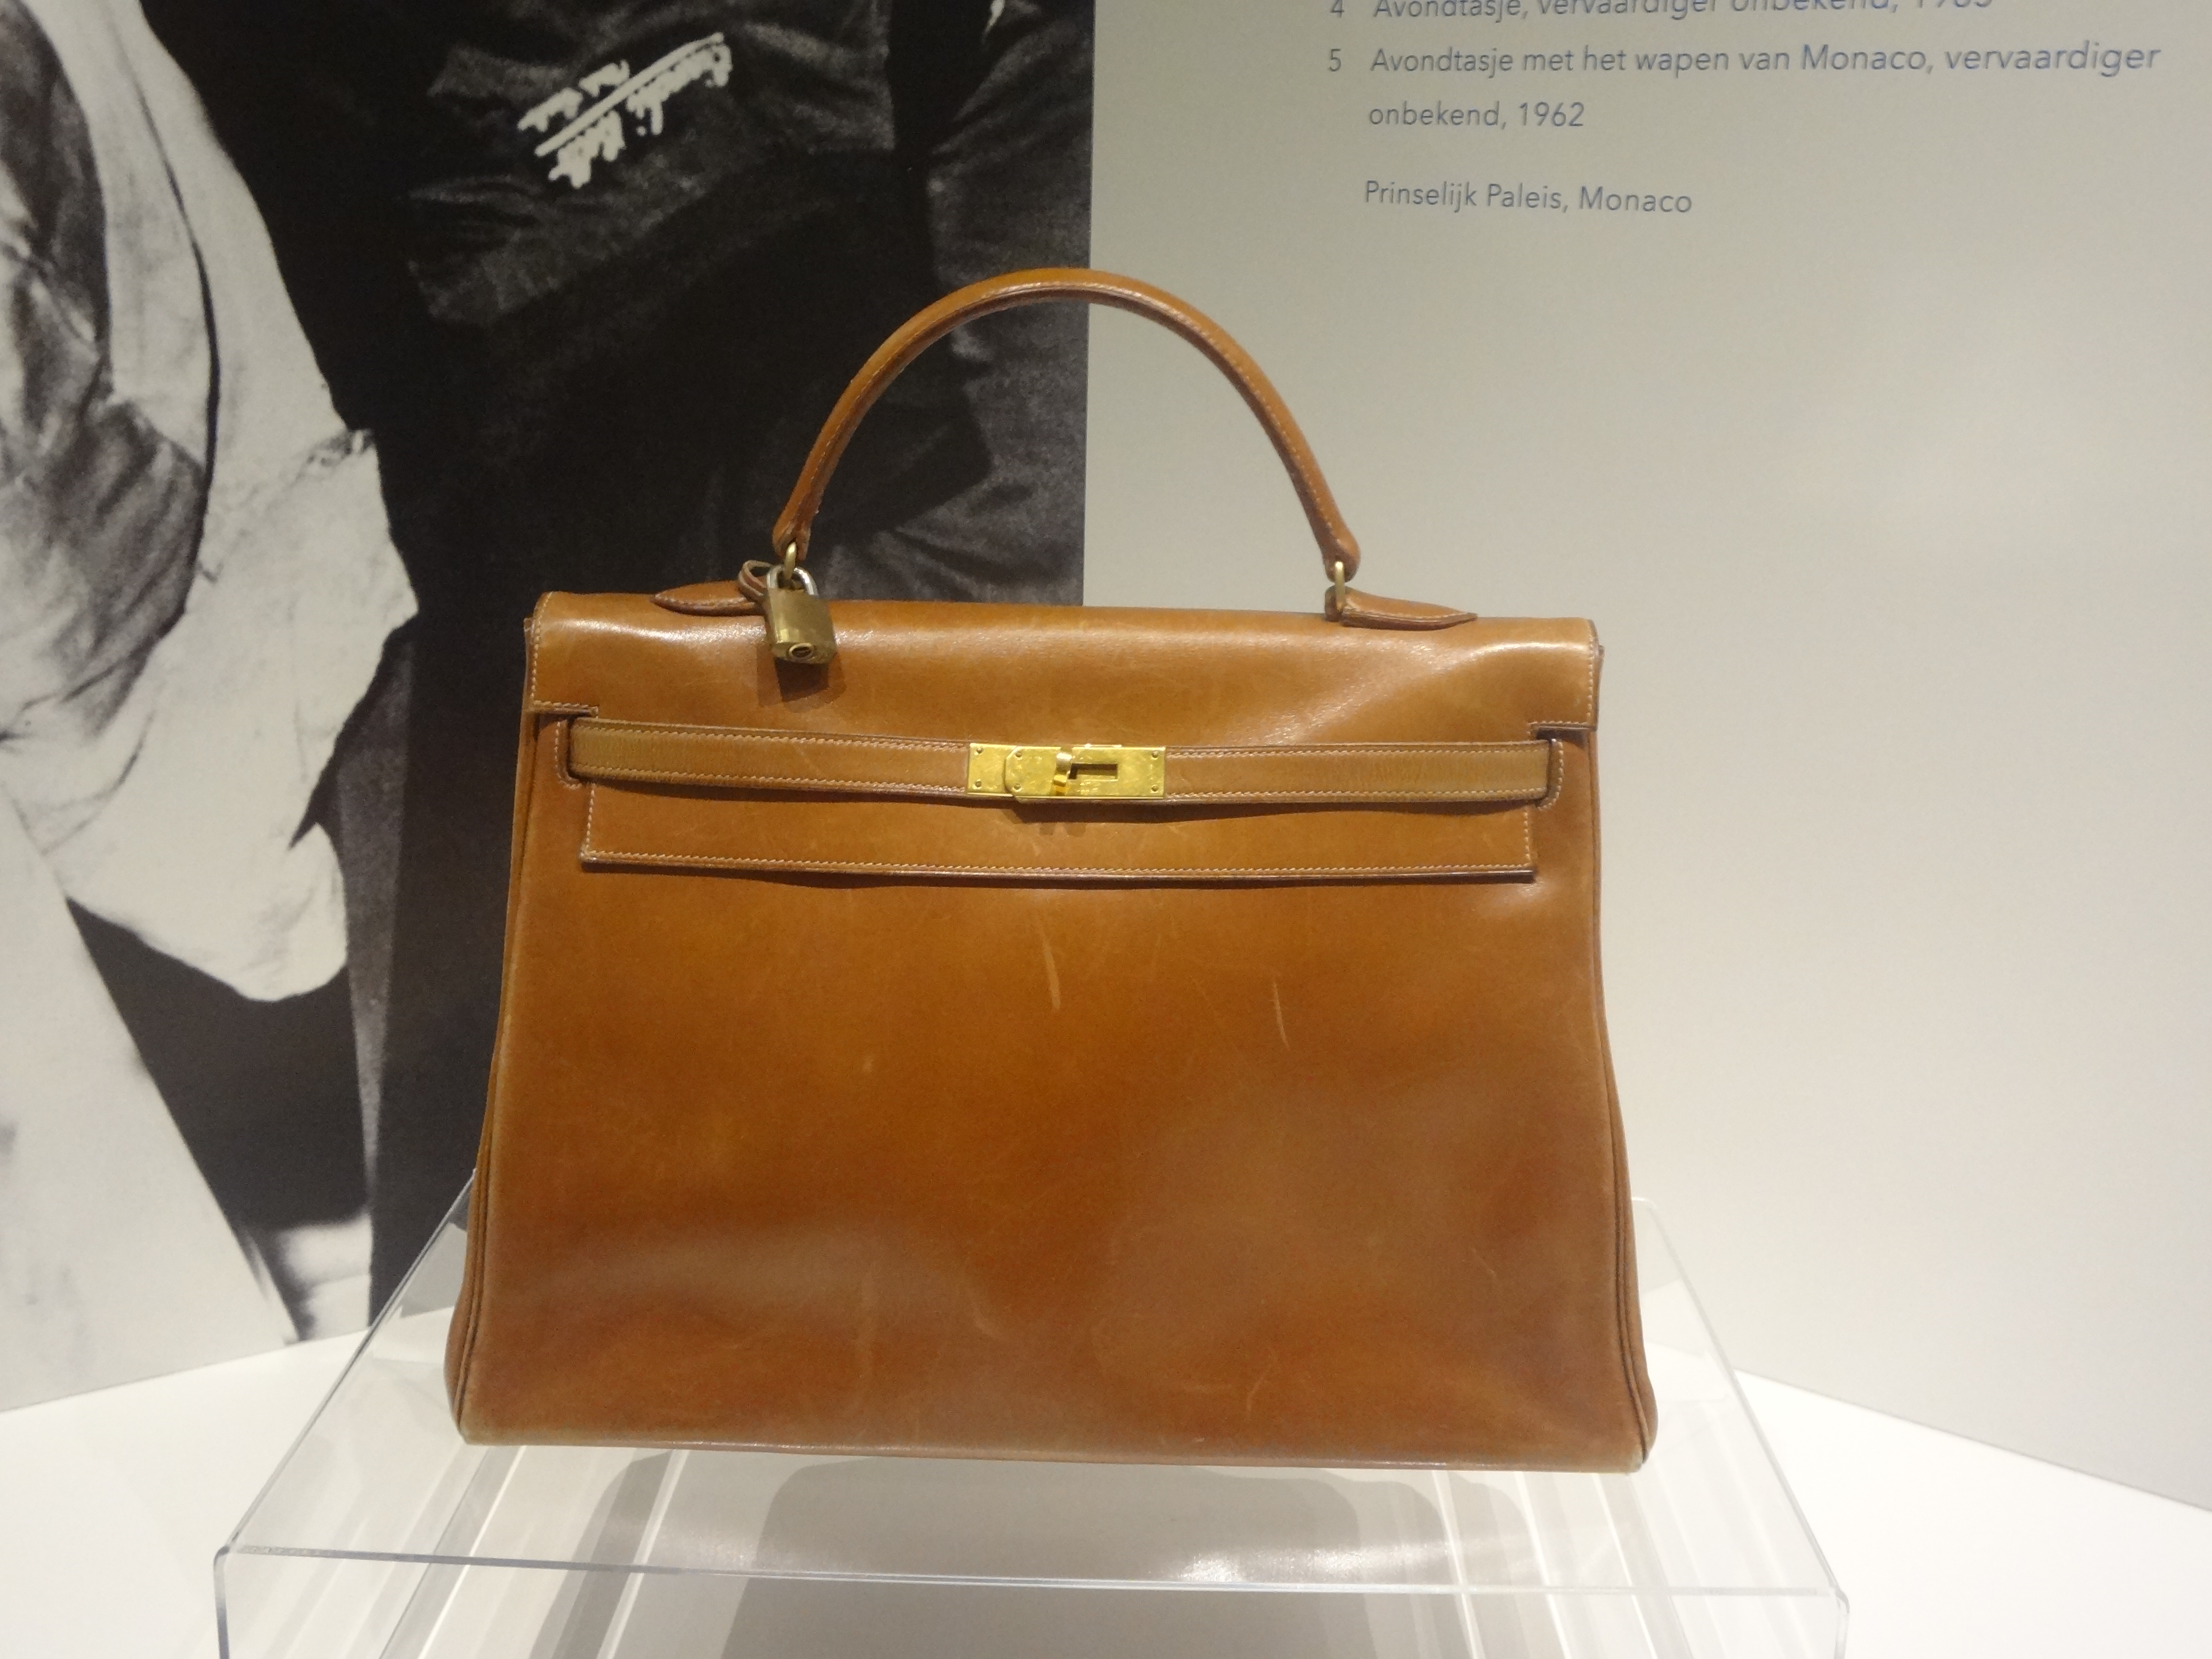 The Birkin and Kelly: The Most Iconic Bags In The History Of